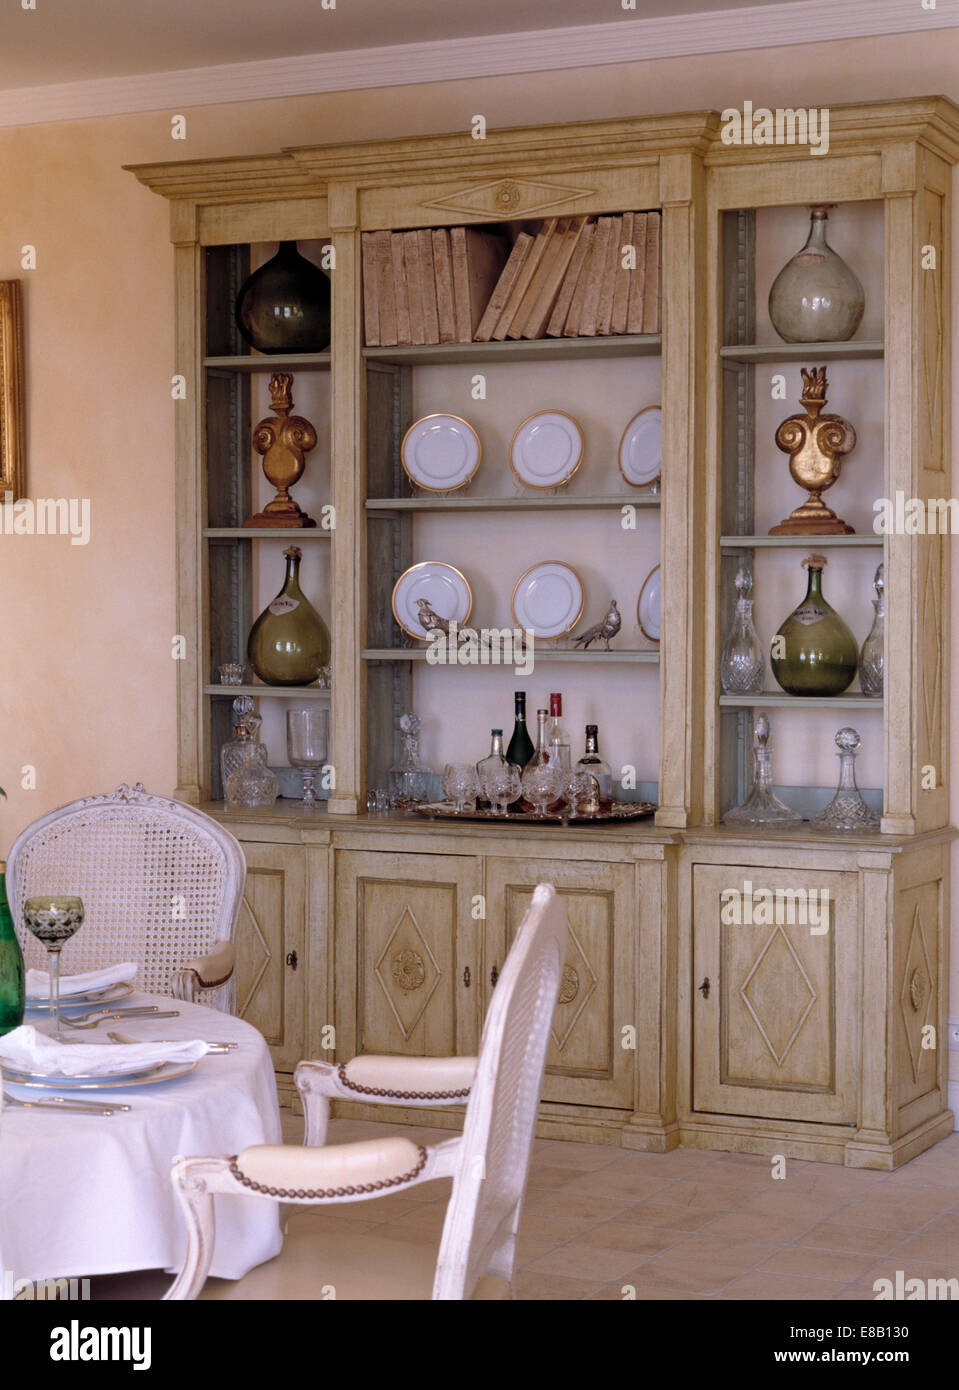 Painted Dresser In French Coastal Dining Room Stock Photo